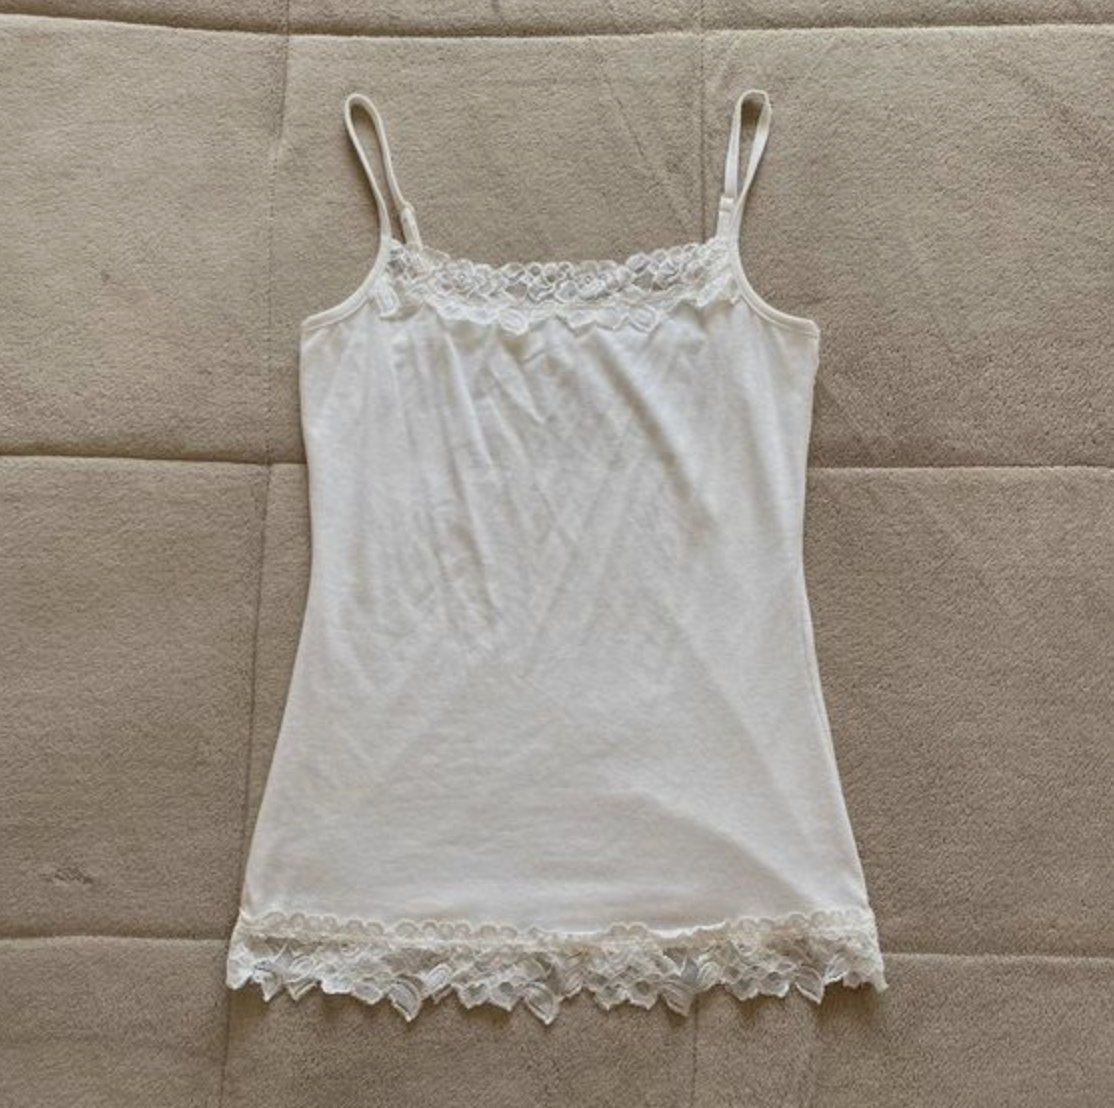 White lace-trimmed camisole on a quilted background